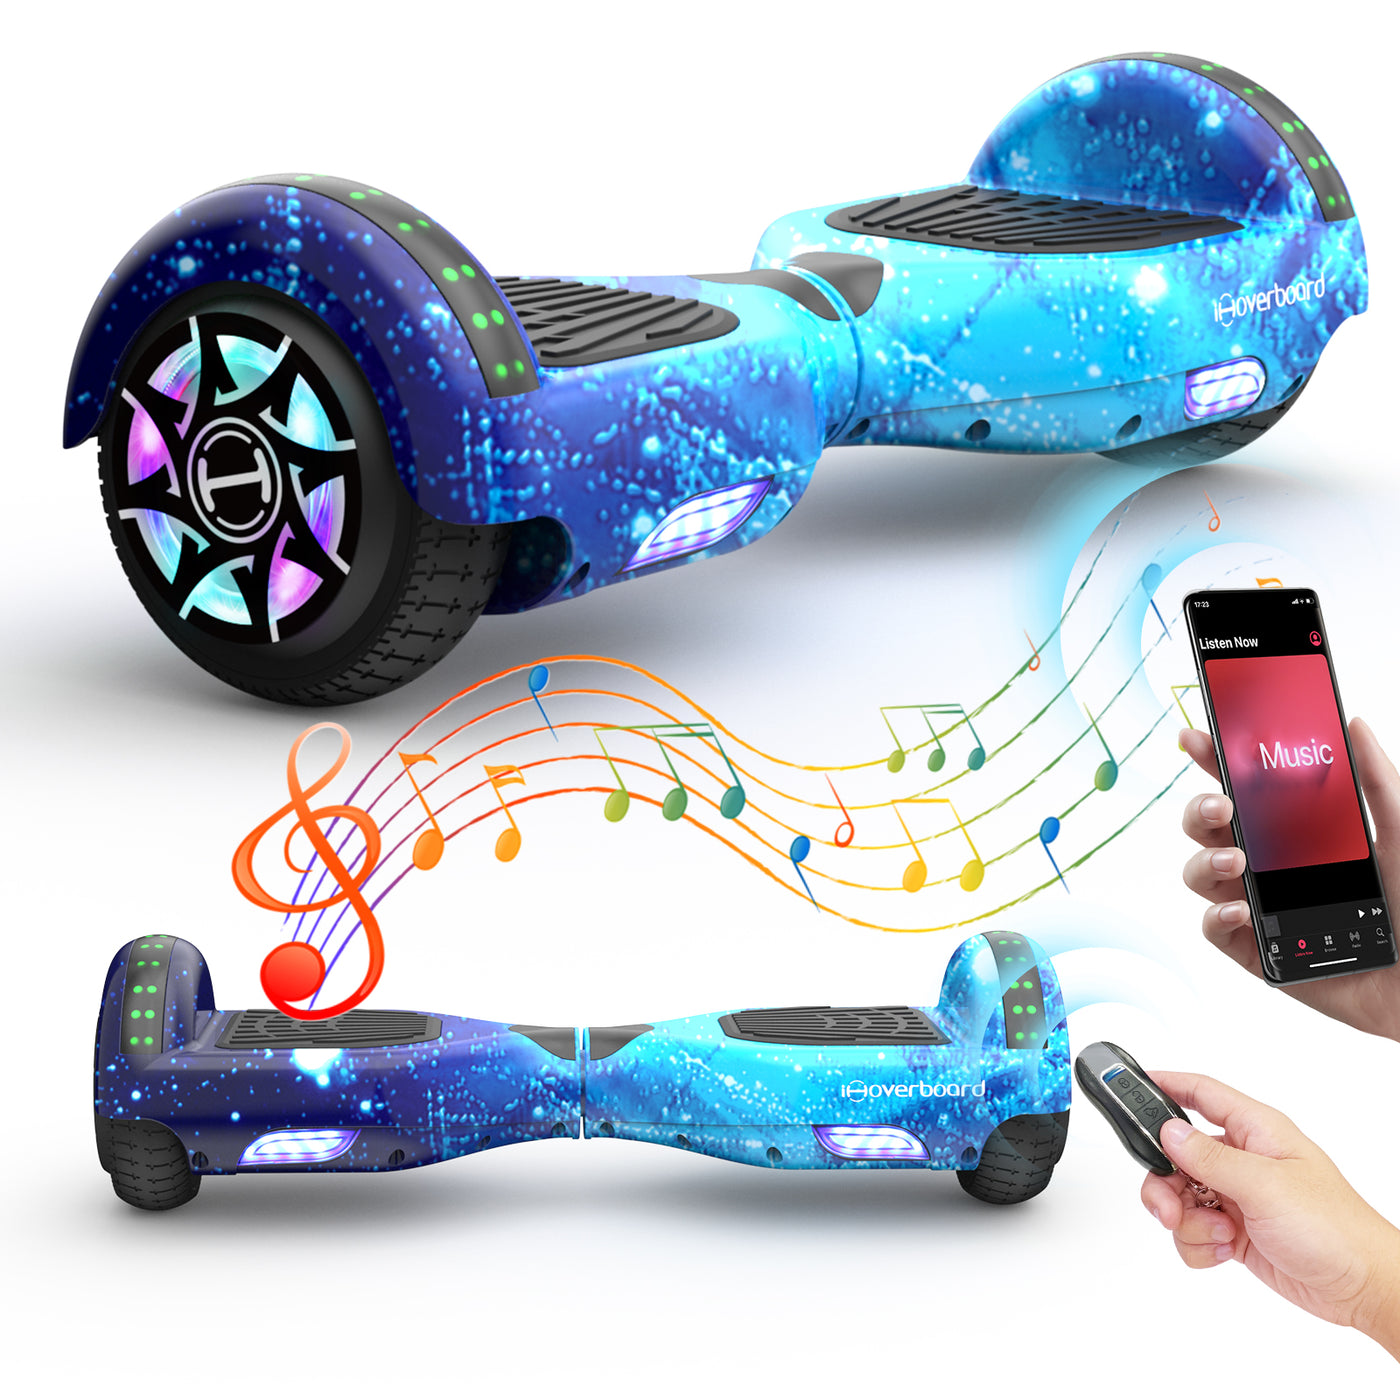 iHoverboard® H1 Hoverboard auto-équilibrant LED 6.5" Nébuleuse Bleu